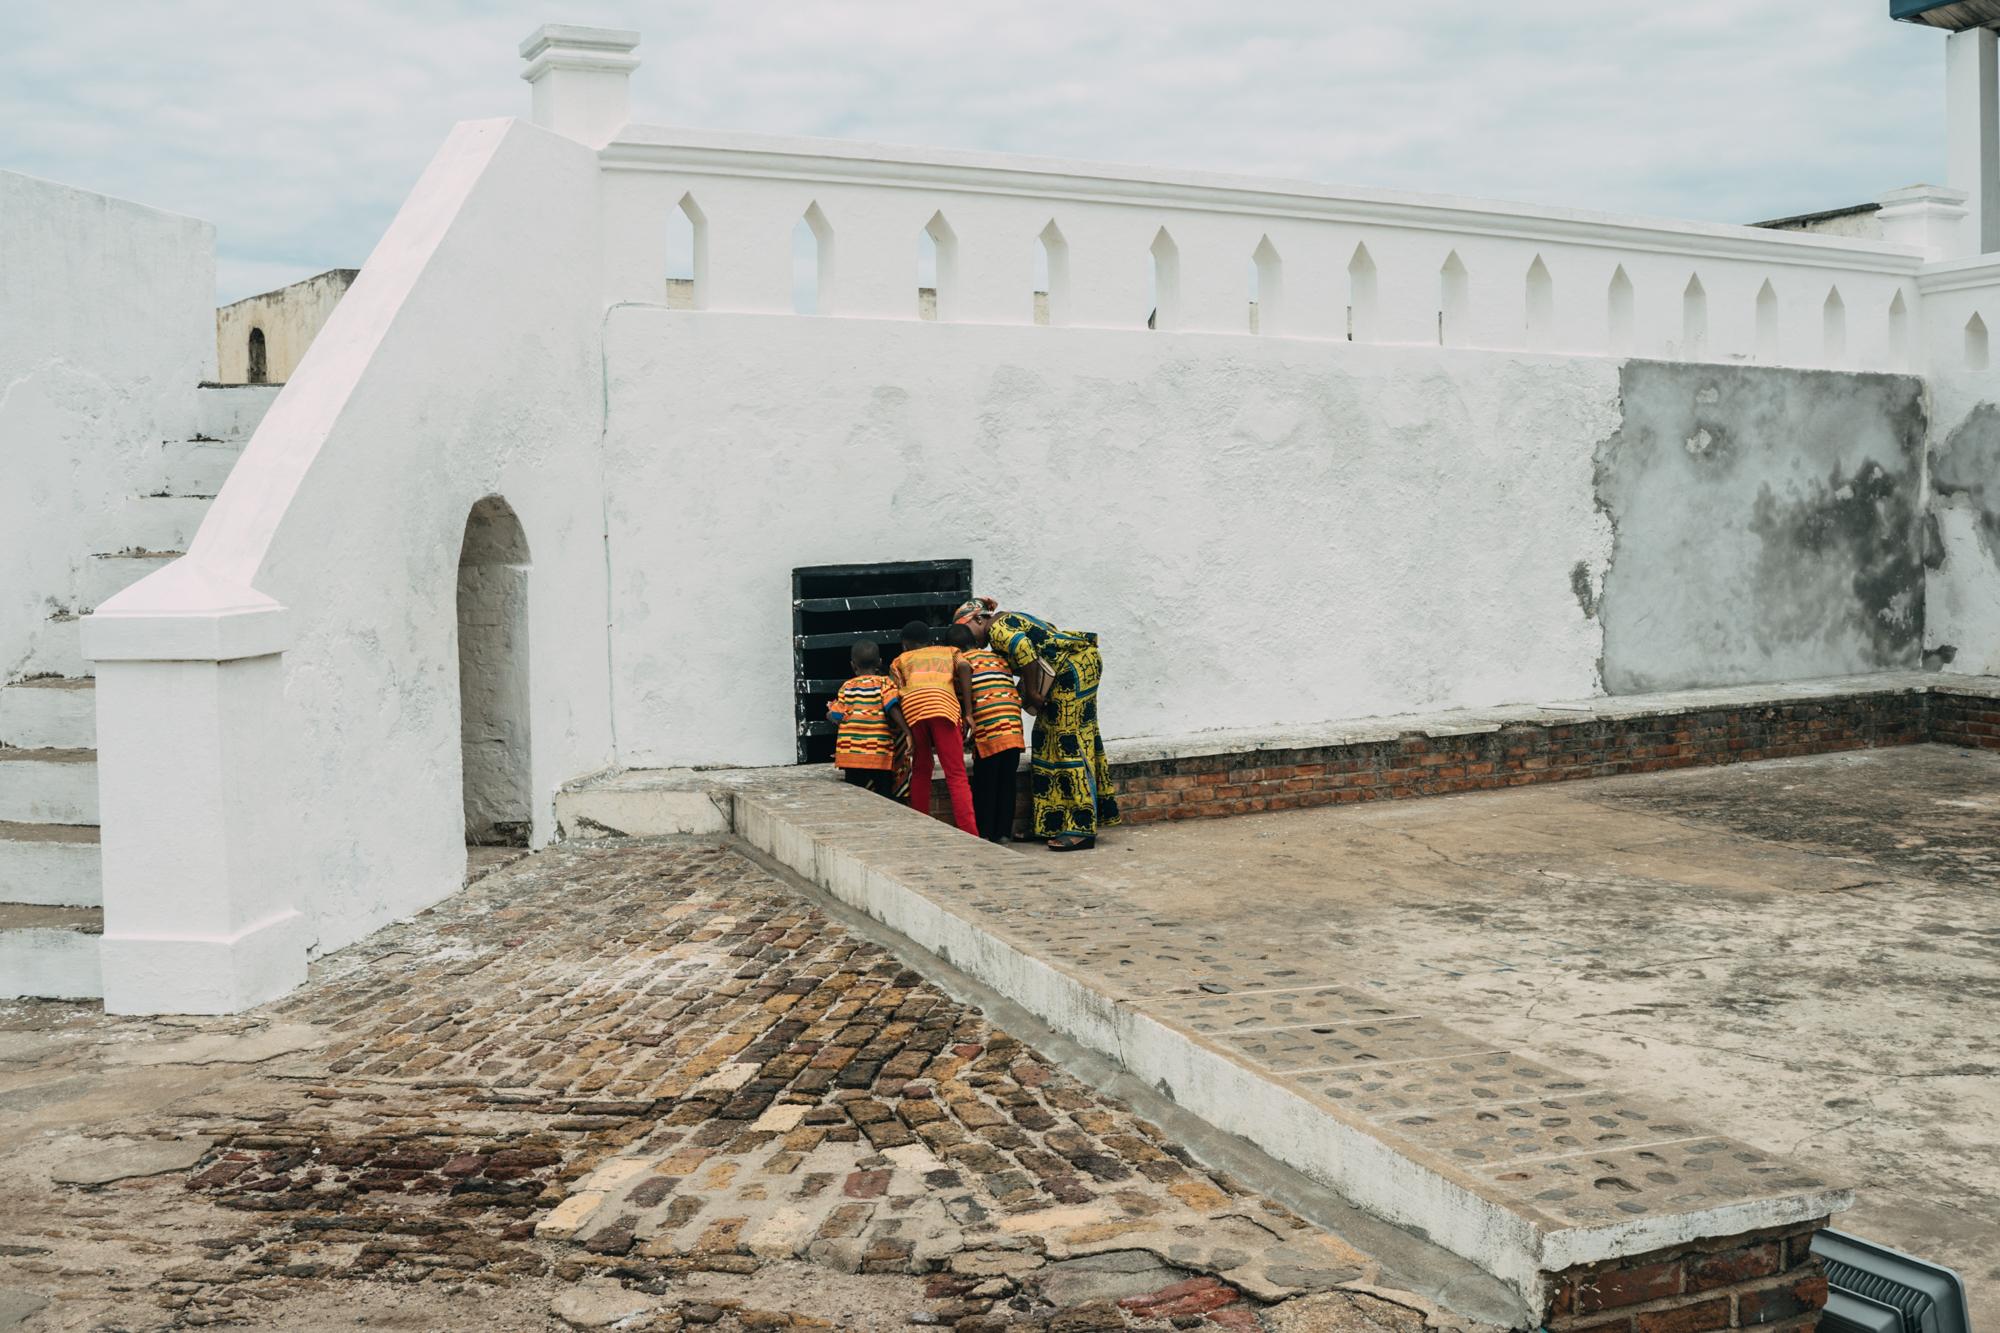 The Year of Return - Mother and her kids look inside the Cape Coast Castle...